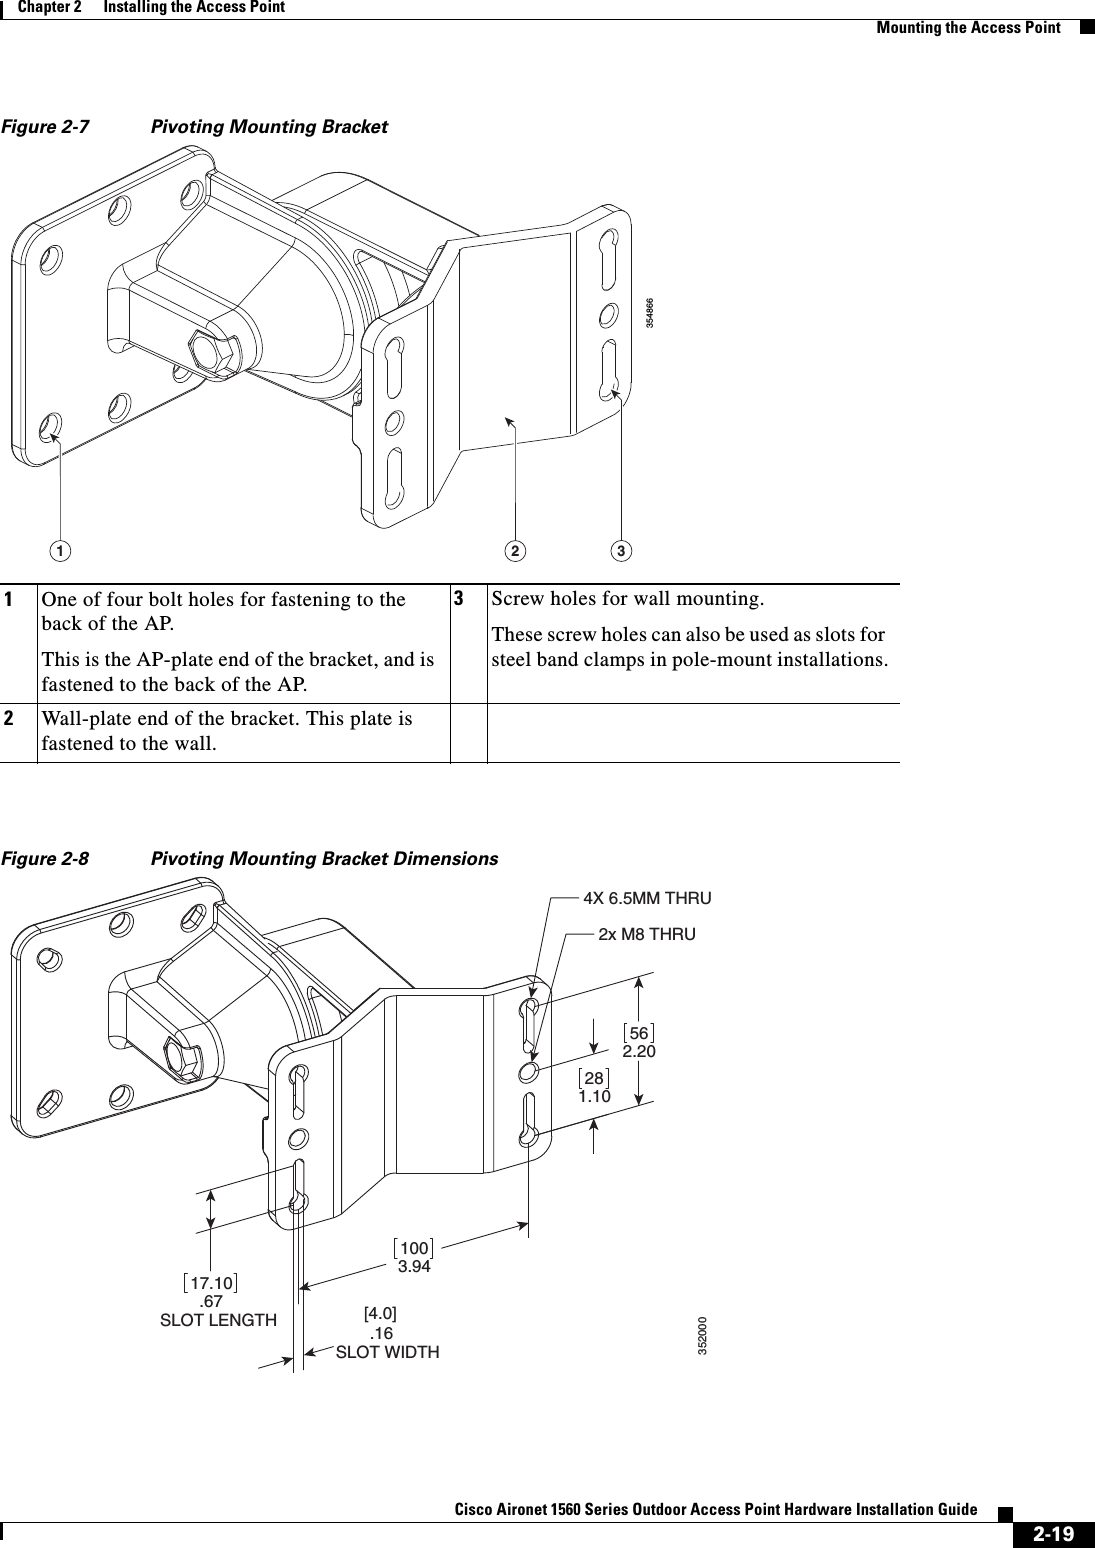  2-19Cisco Aironet 1560 Series Outdoor Access Point Hardware Installation Guide Chapter 2      Installing the Access PointMounting the Access PointFigure 2-7 Pivoting Mounting Bracket   Figure 2-8 Pivoting Mounting Bracket Dimensions  1One of four bolt holes for fastening to the back of the AP. This is the AP-plate end of the bracket, and is fastened to the back of the AP.3Screw holes for wall mounting.These screw holes can also be used as slots for steel band clamps in pole-mount installations.2Wall-plate end of the bracket. This plate is fastened to the wall.3548662133520001003.94281.10562.20 2x M8 THRU  4X 6.5MM THRU 17.10.67SLOT LENGTH [4.0].16SLOT WIDTH